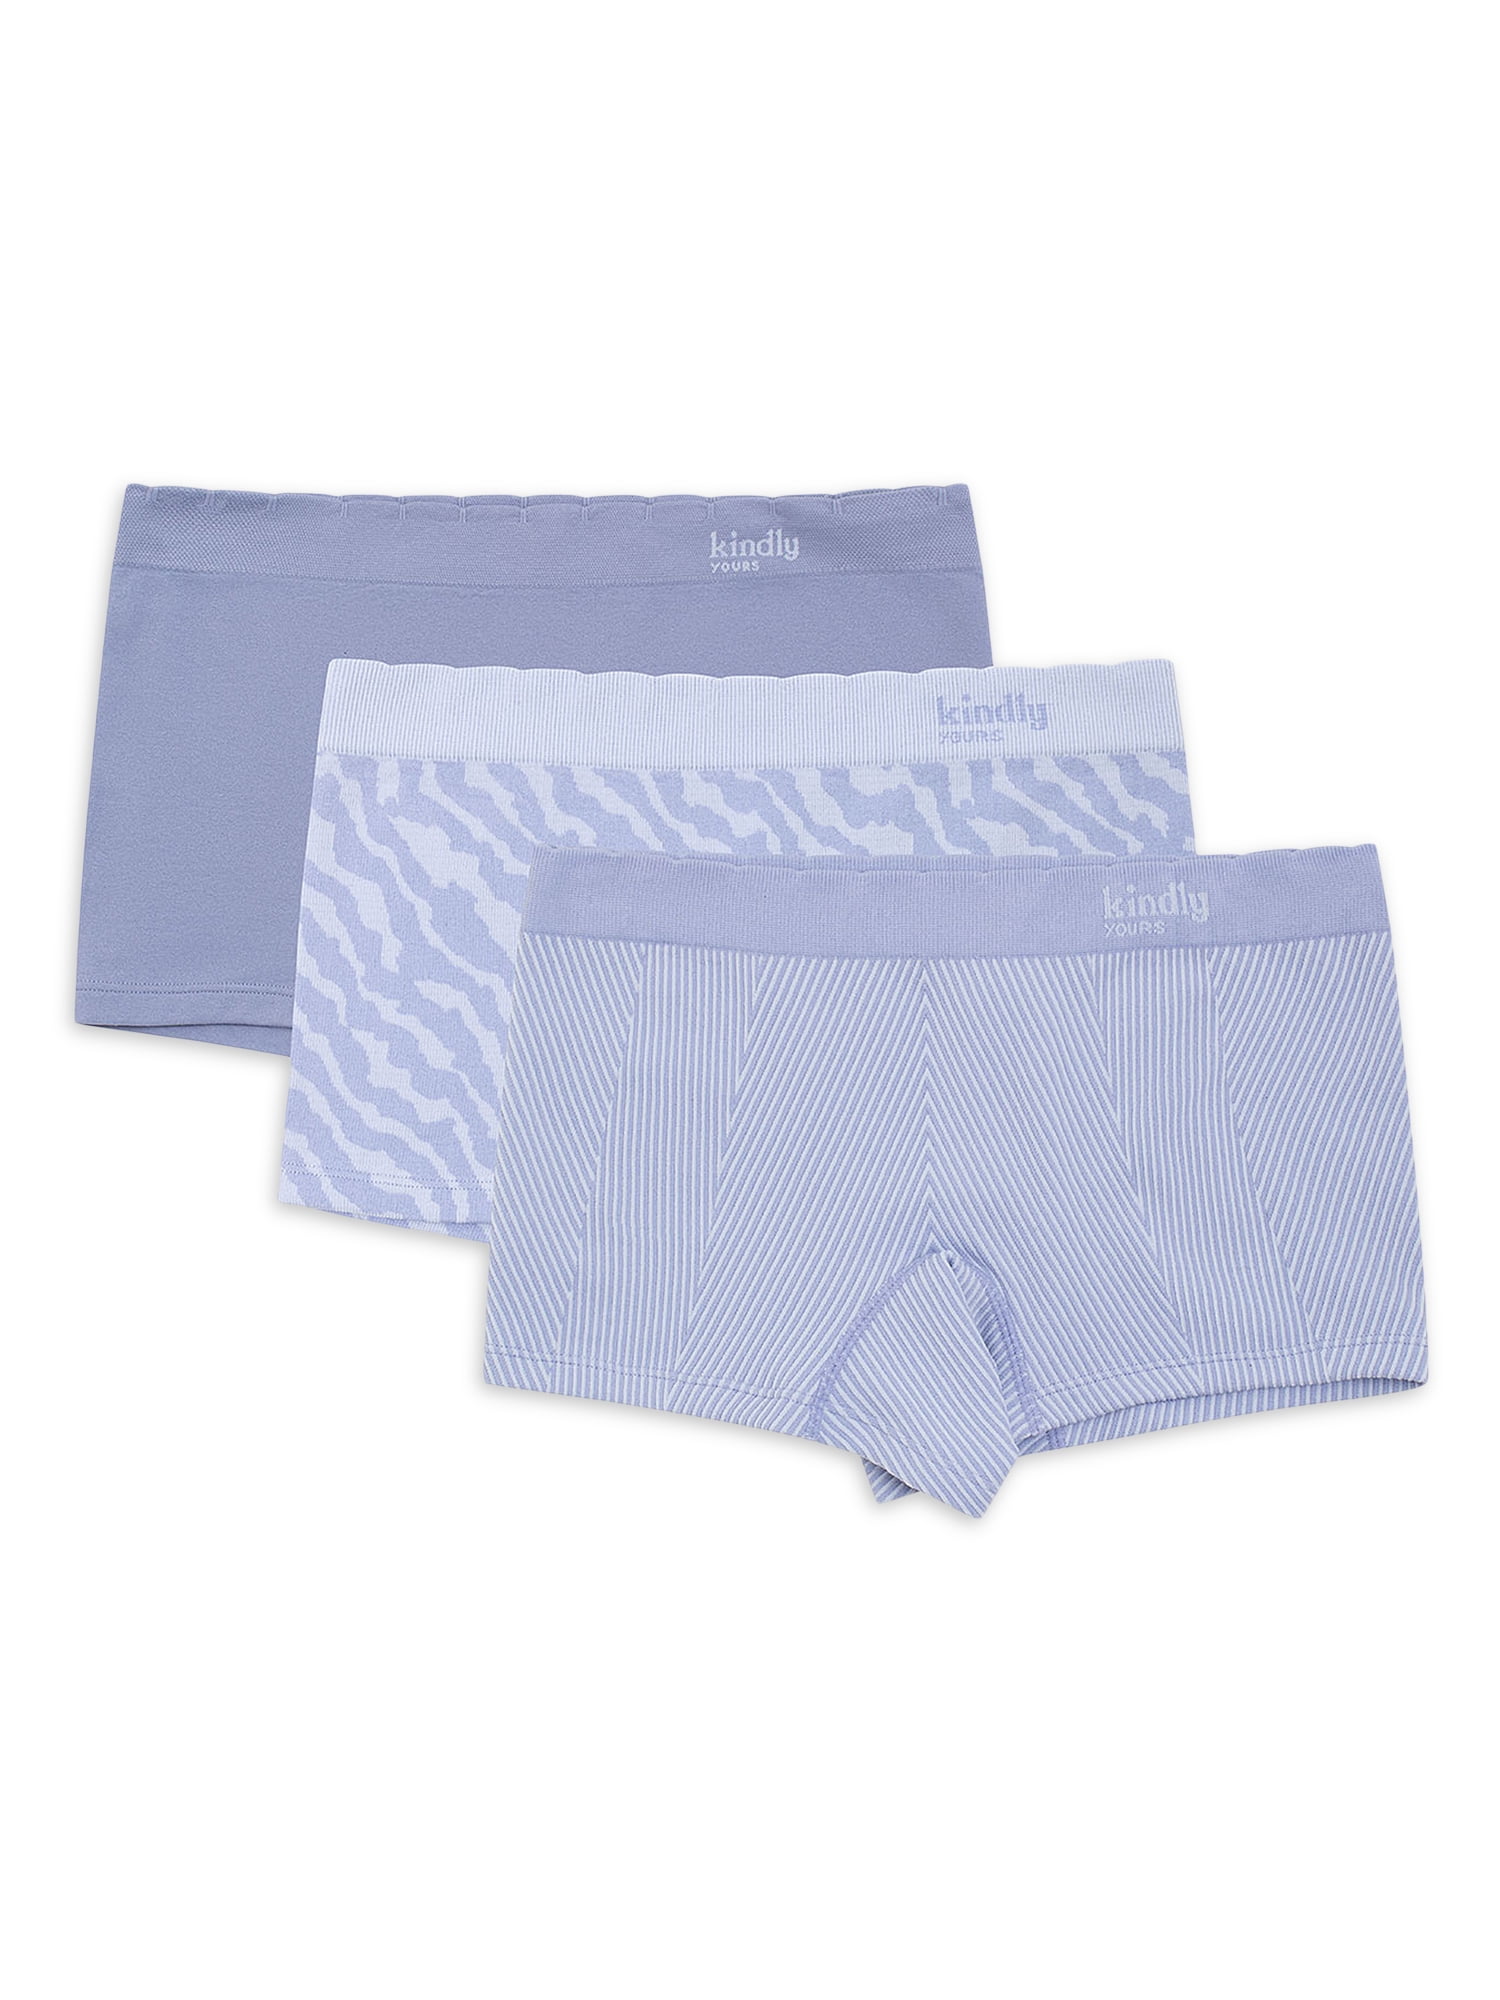 Kindly Yours Women's Sustainable Micro Thong Panties, 3-Pack